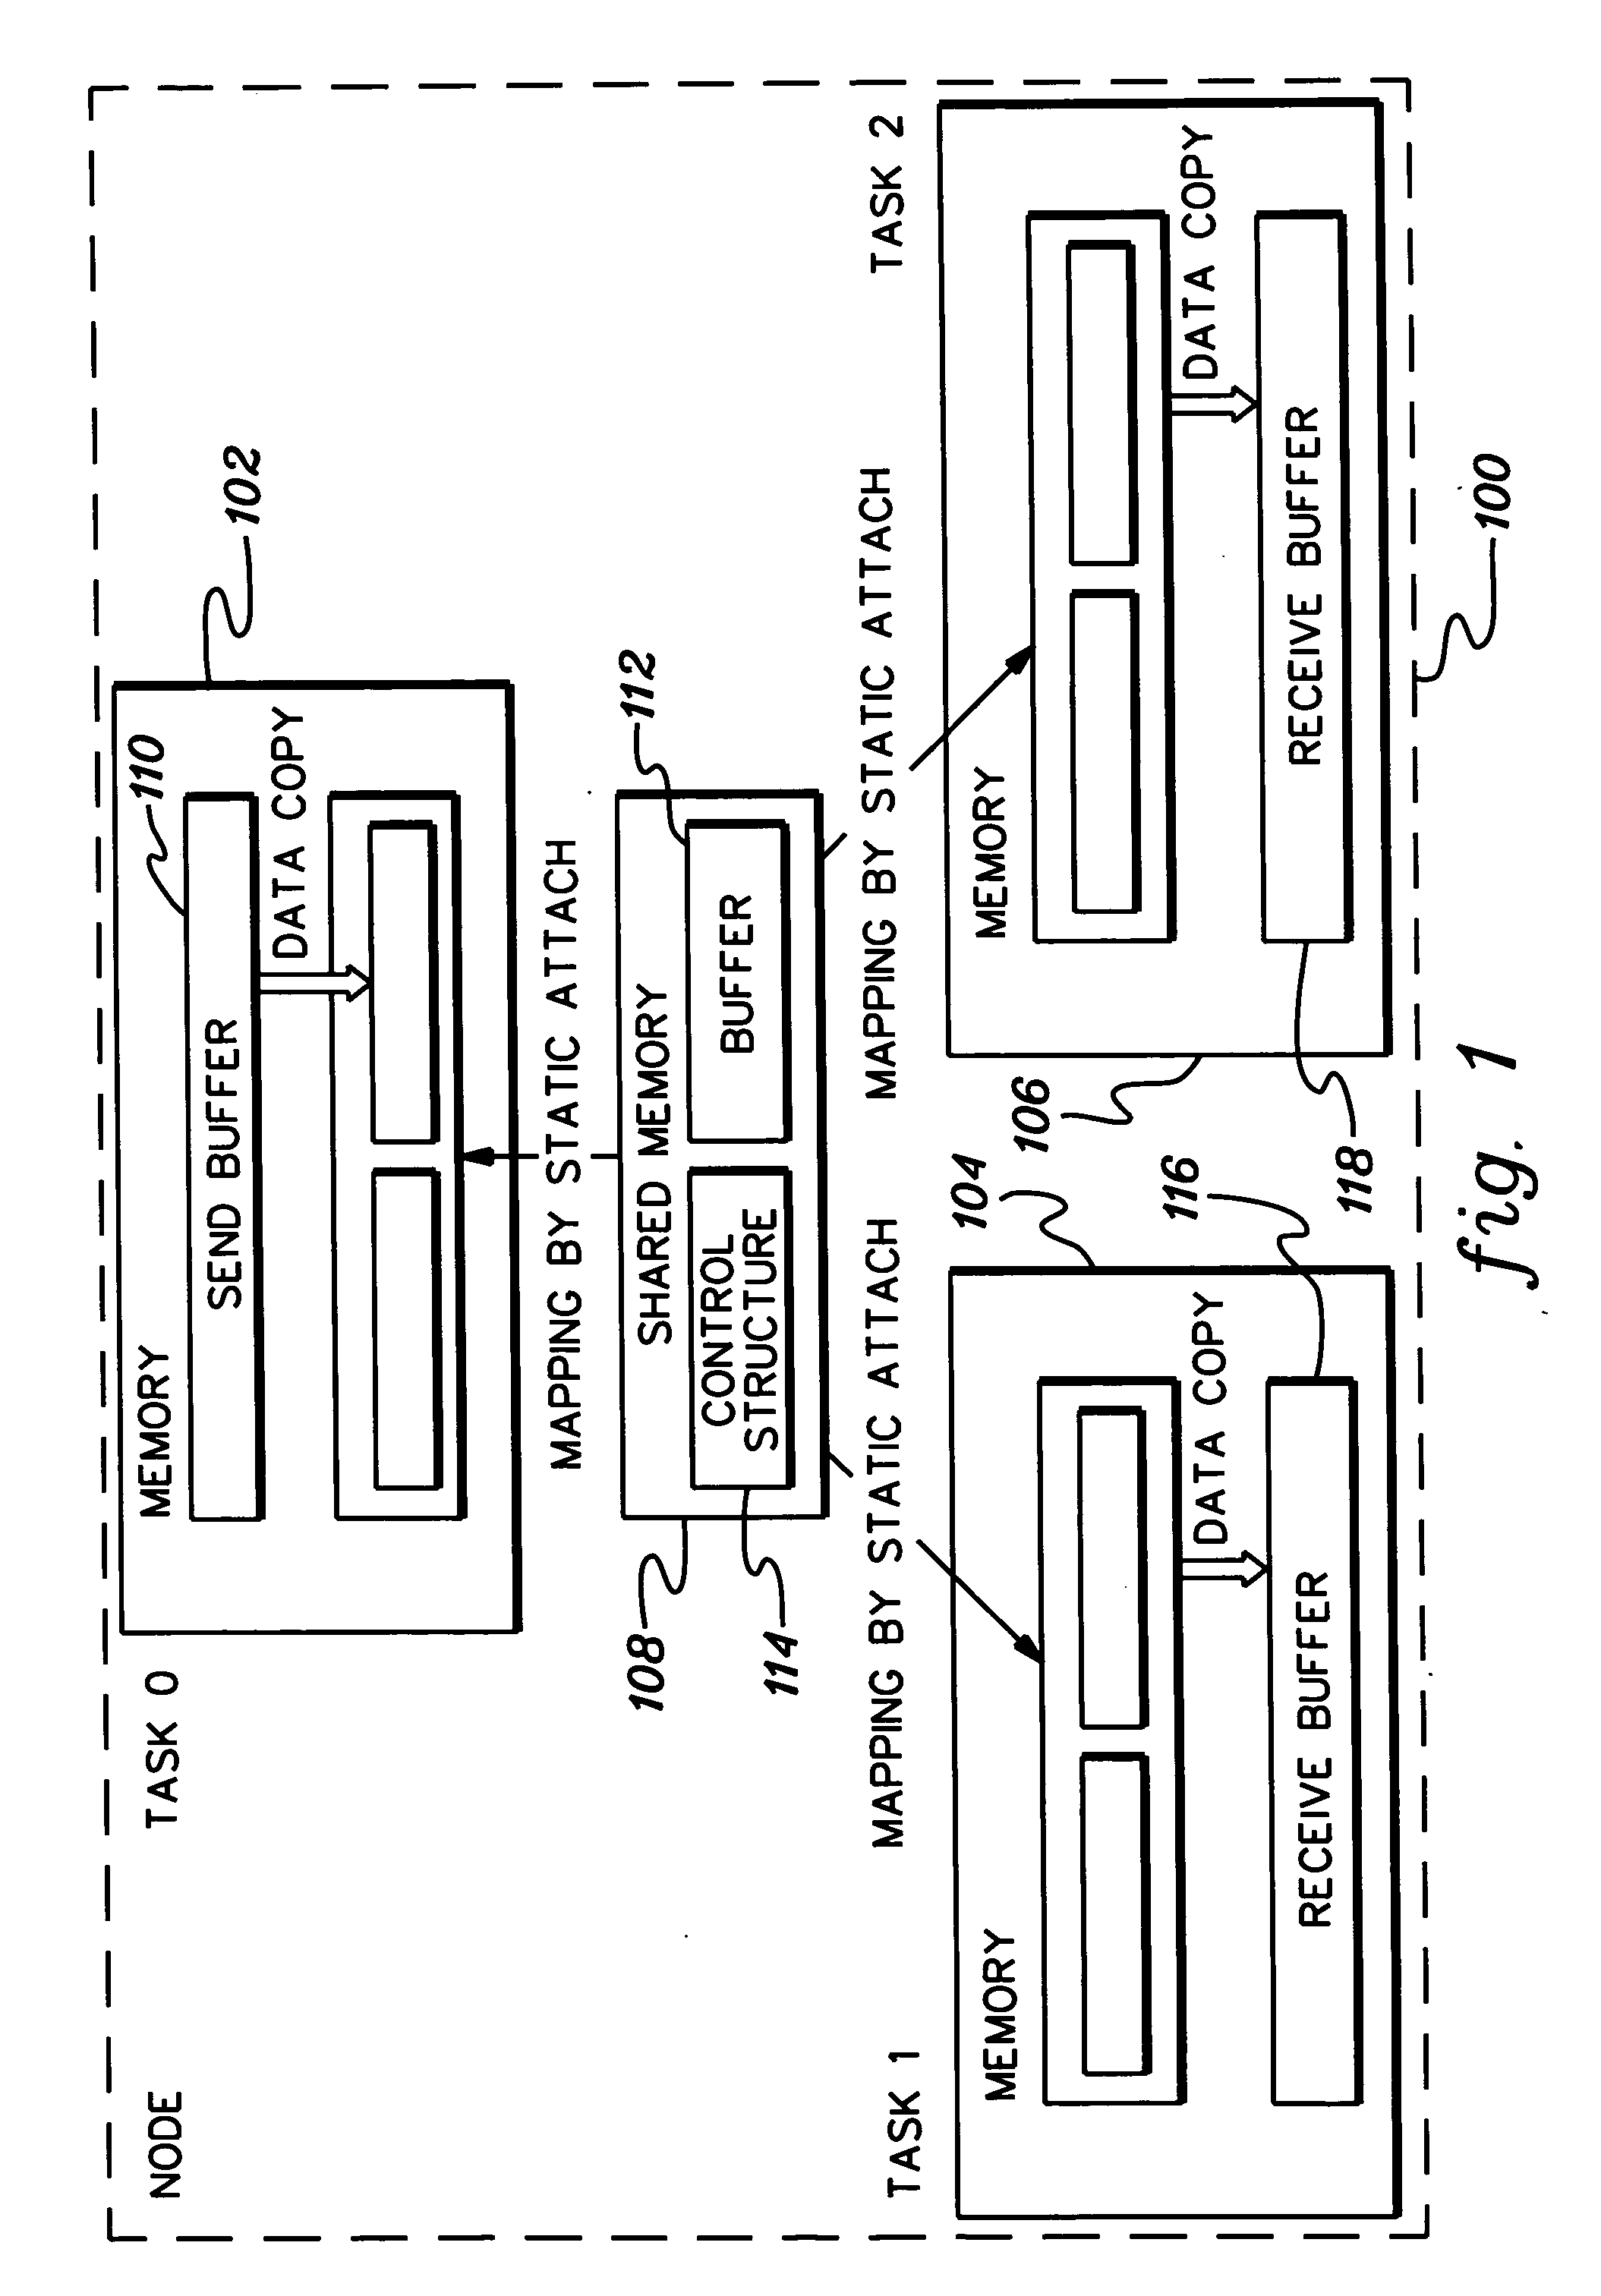 Facilitating intra-node data transfer in collective communications